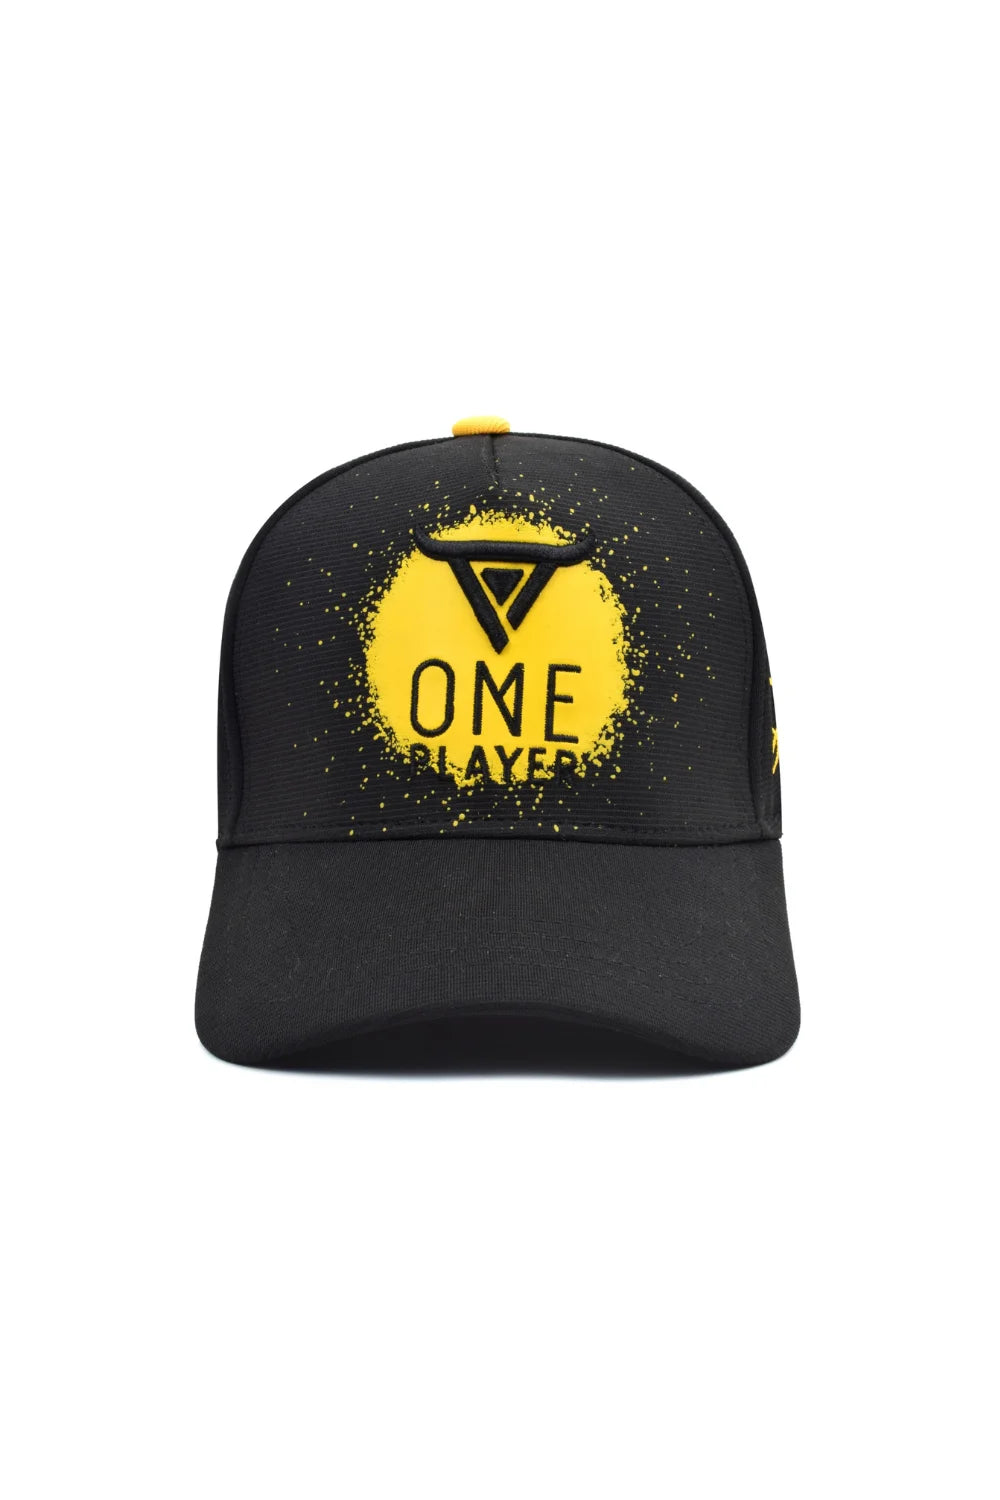 Unisex Black & Yellow Solid Baseball cap, has a visor by One Player